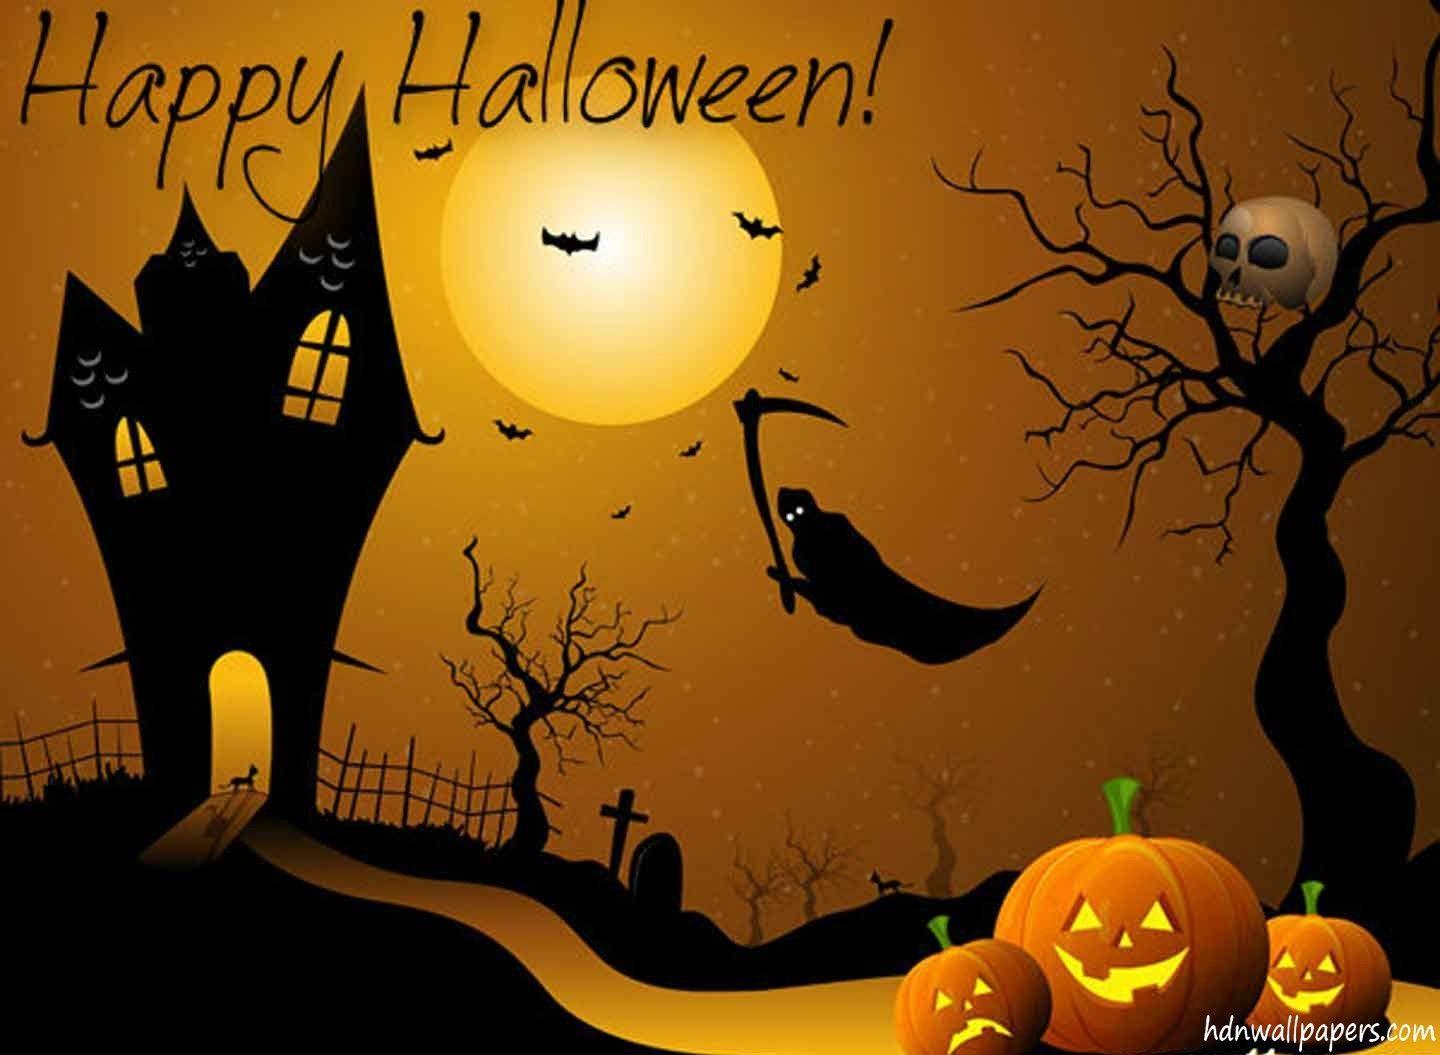 HD Happy Halloween background Wallpaper 100% High Quality